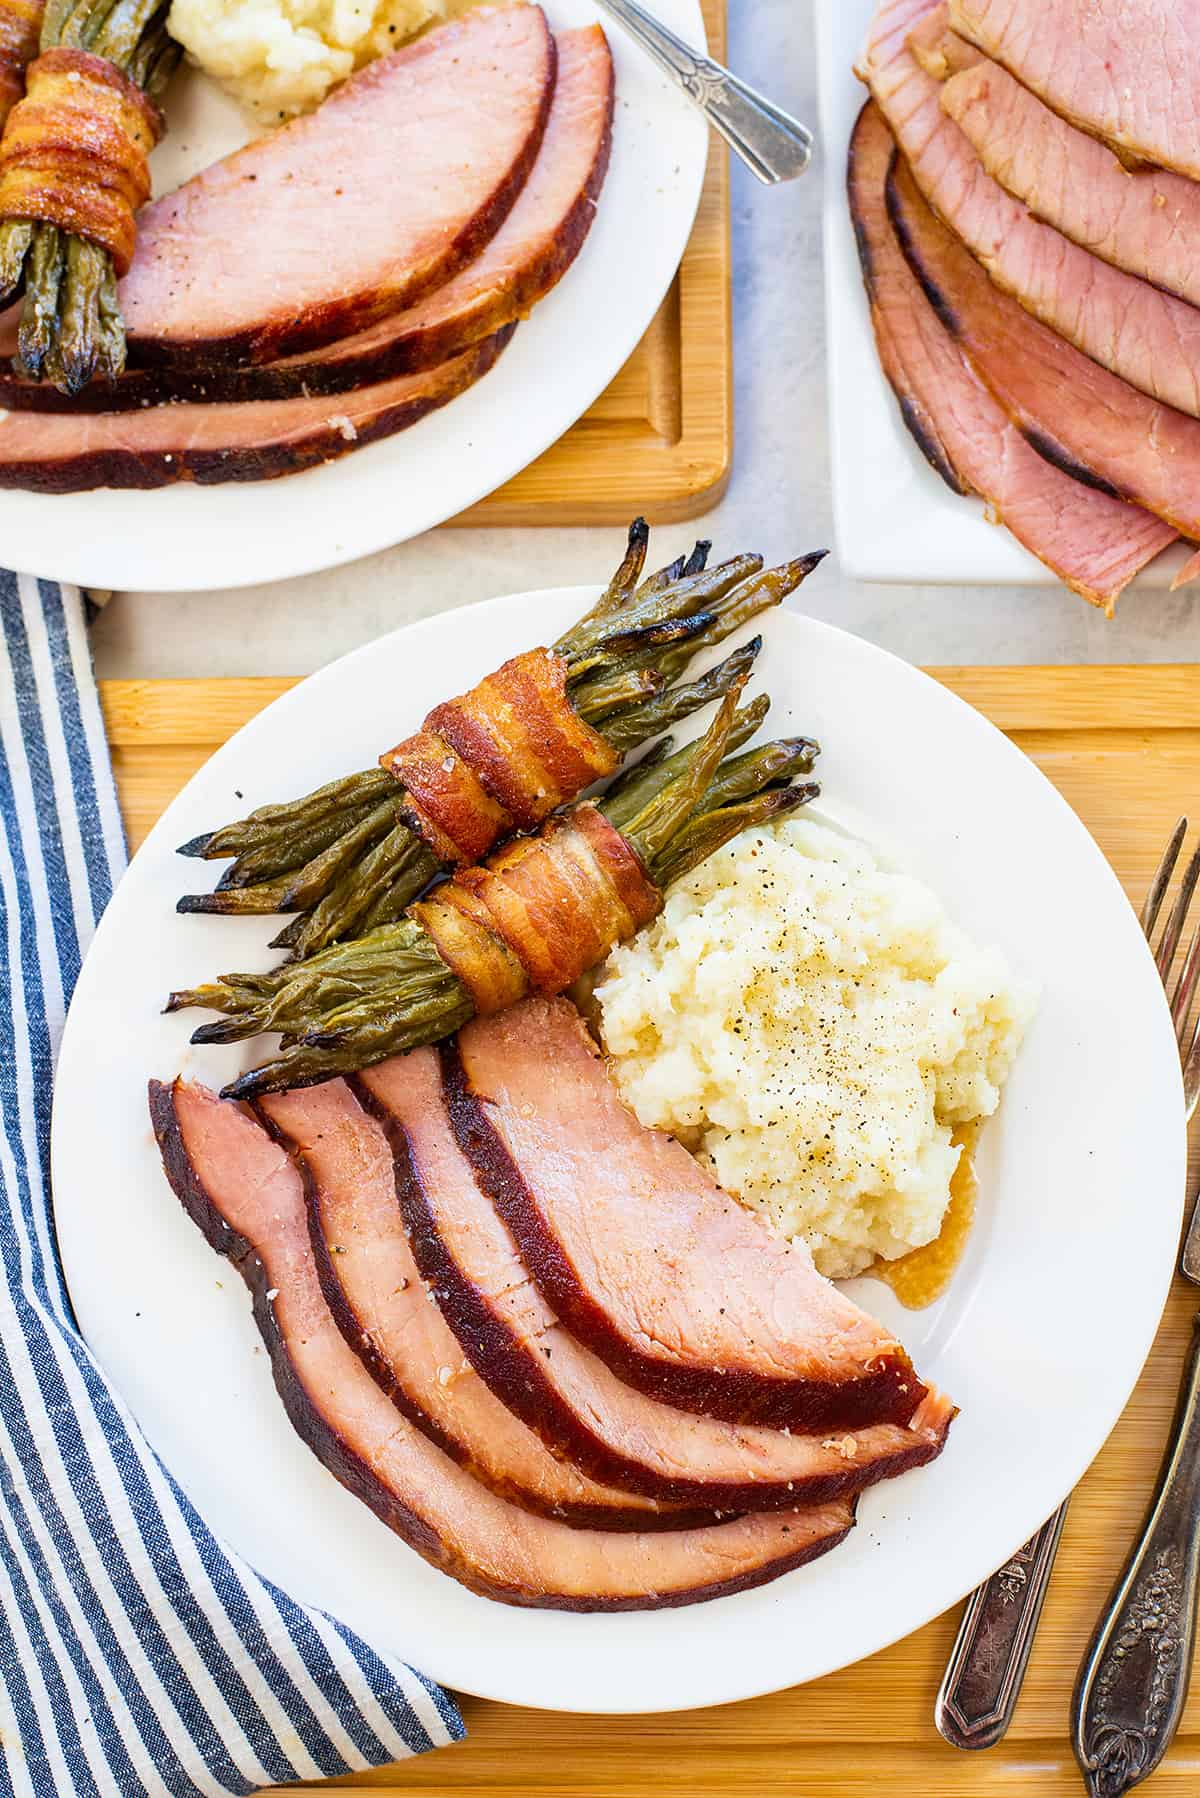 Slices of ham on plate next to mashed cauliflower and bacon wrapped green beans.